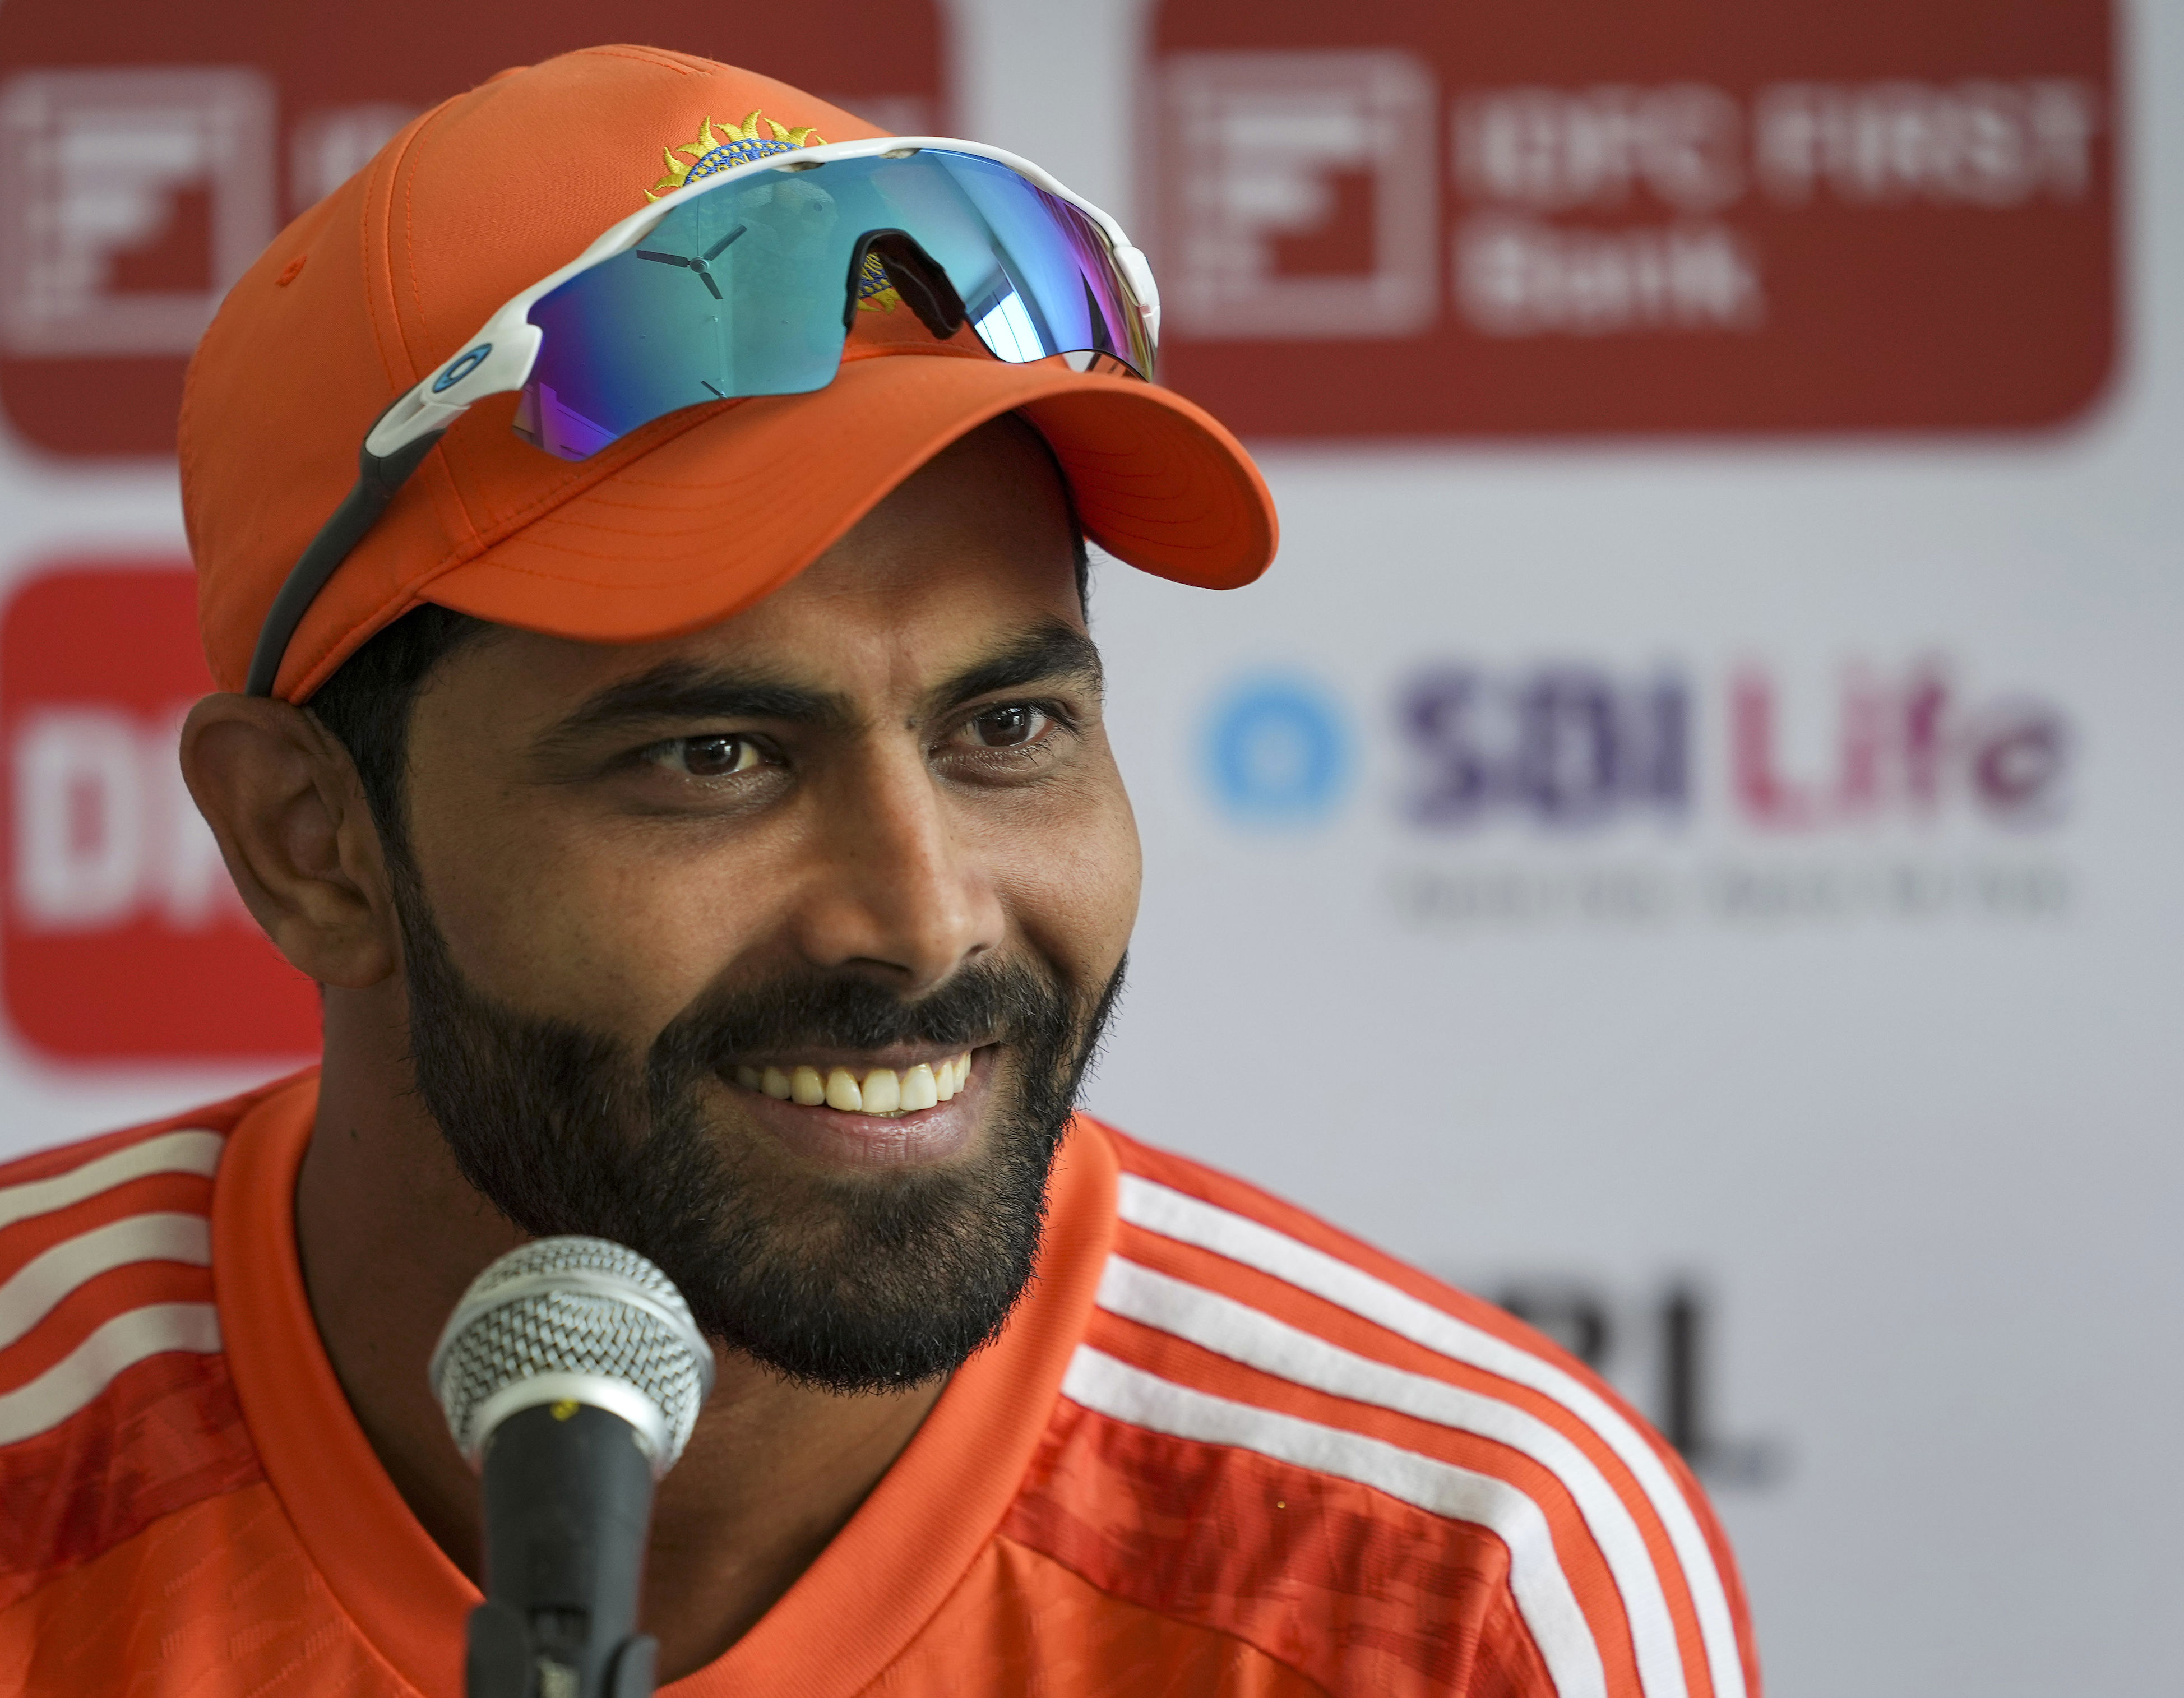 england are not difficult to beat, they just play differently: jadeja